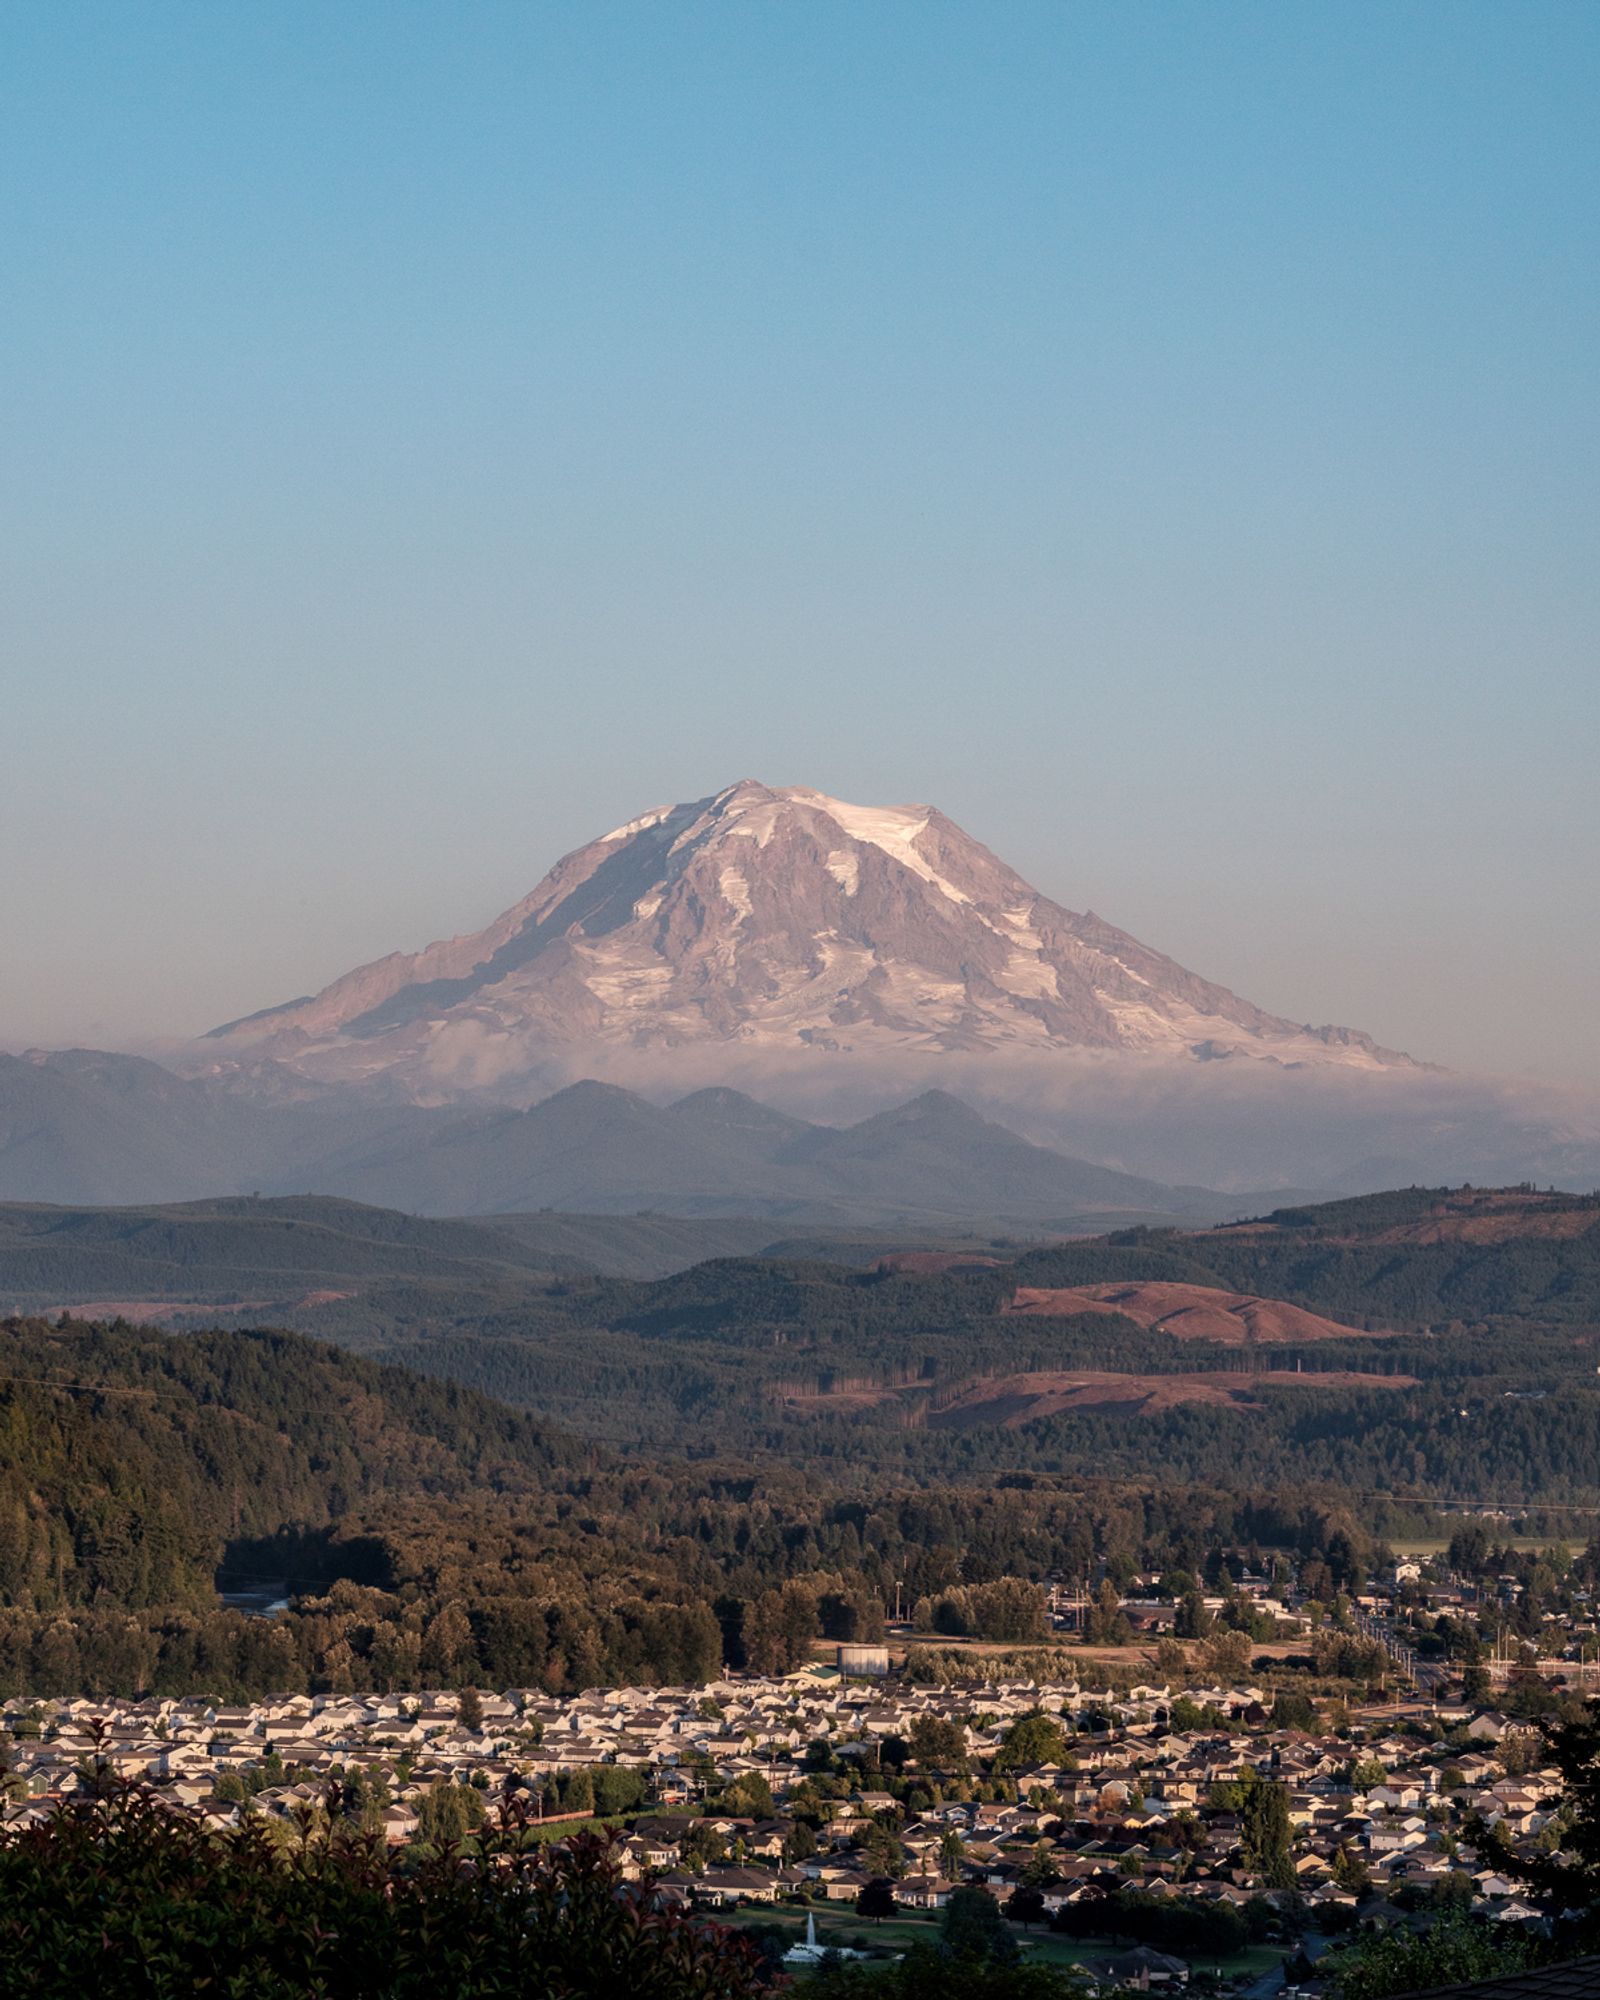 © Alana Celii - Mt. Rainier looming over the town of Orting as seen from South Hill, WA.